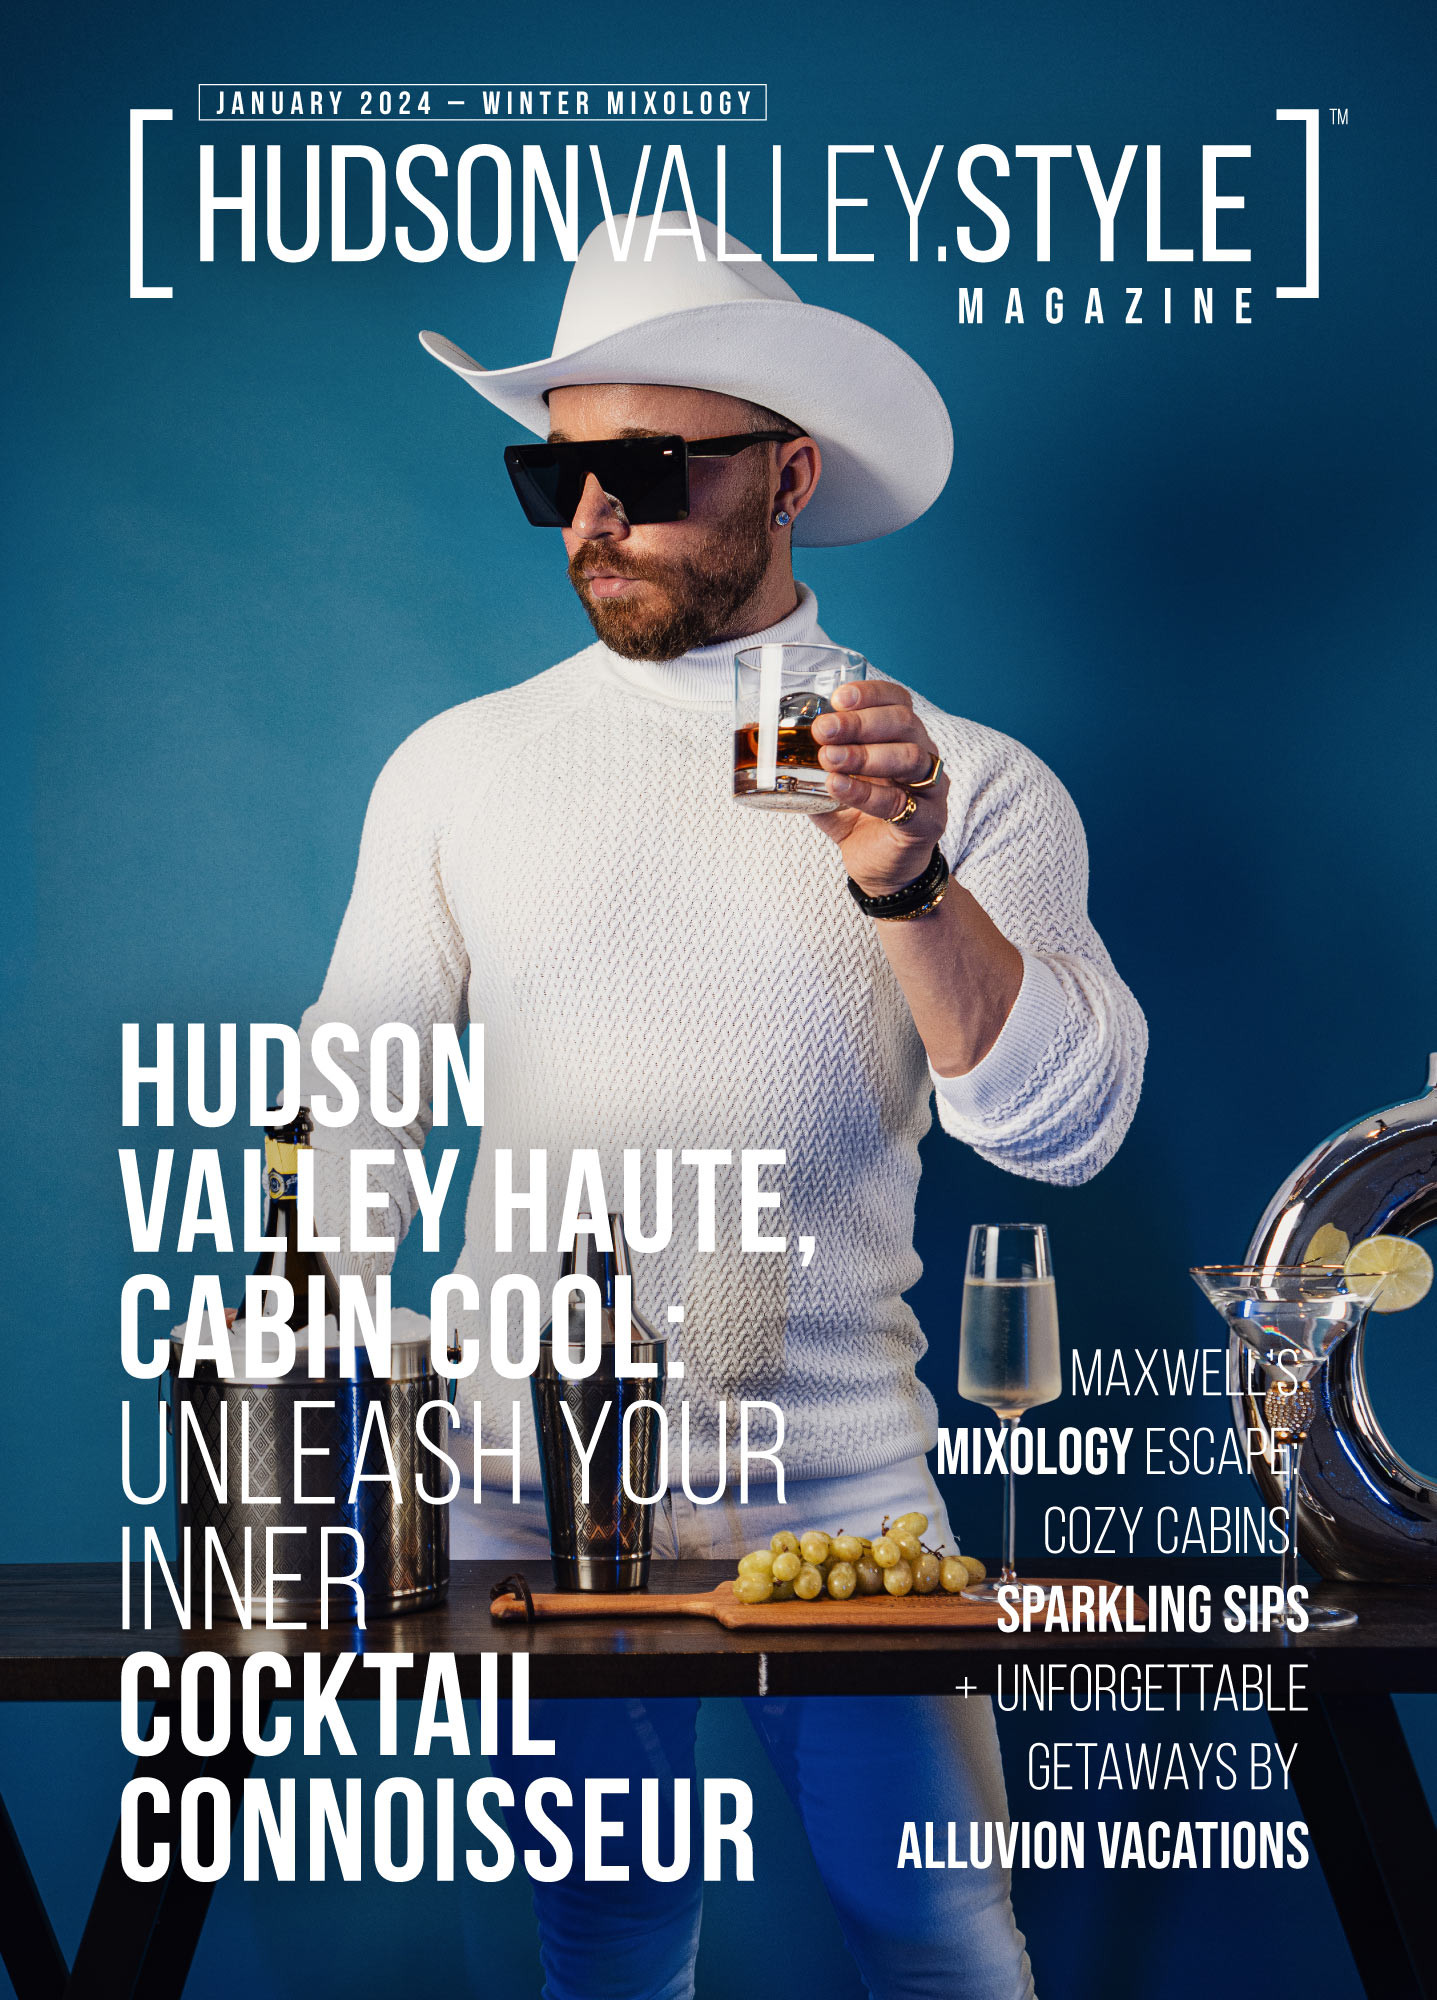 How to Turn Your Hudson Valley Hideaway into Mixology Playground: A Recipe for Epic Winter Vacay Vibes! – January 2024 Cover Story – Photography by Maxwell Alexander for Alluvion Media – Hudson Valley Style Mixology with Maxwell Alexander – Presented by Alluvion Vacations